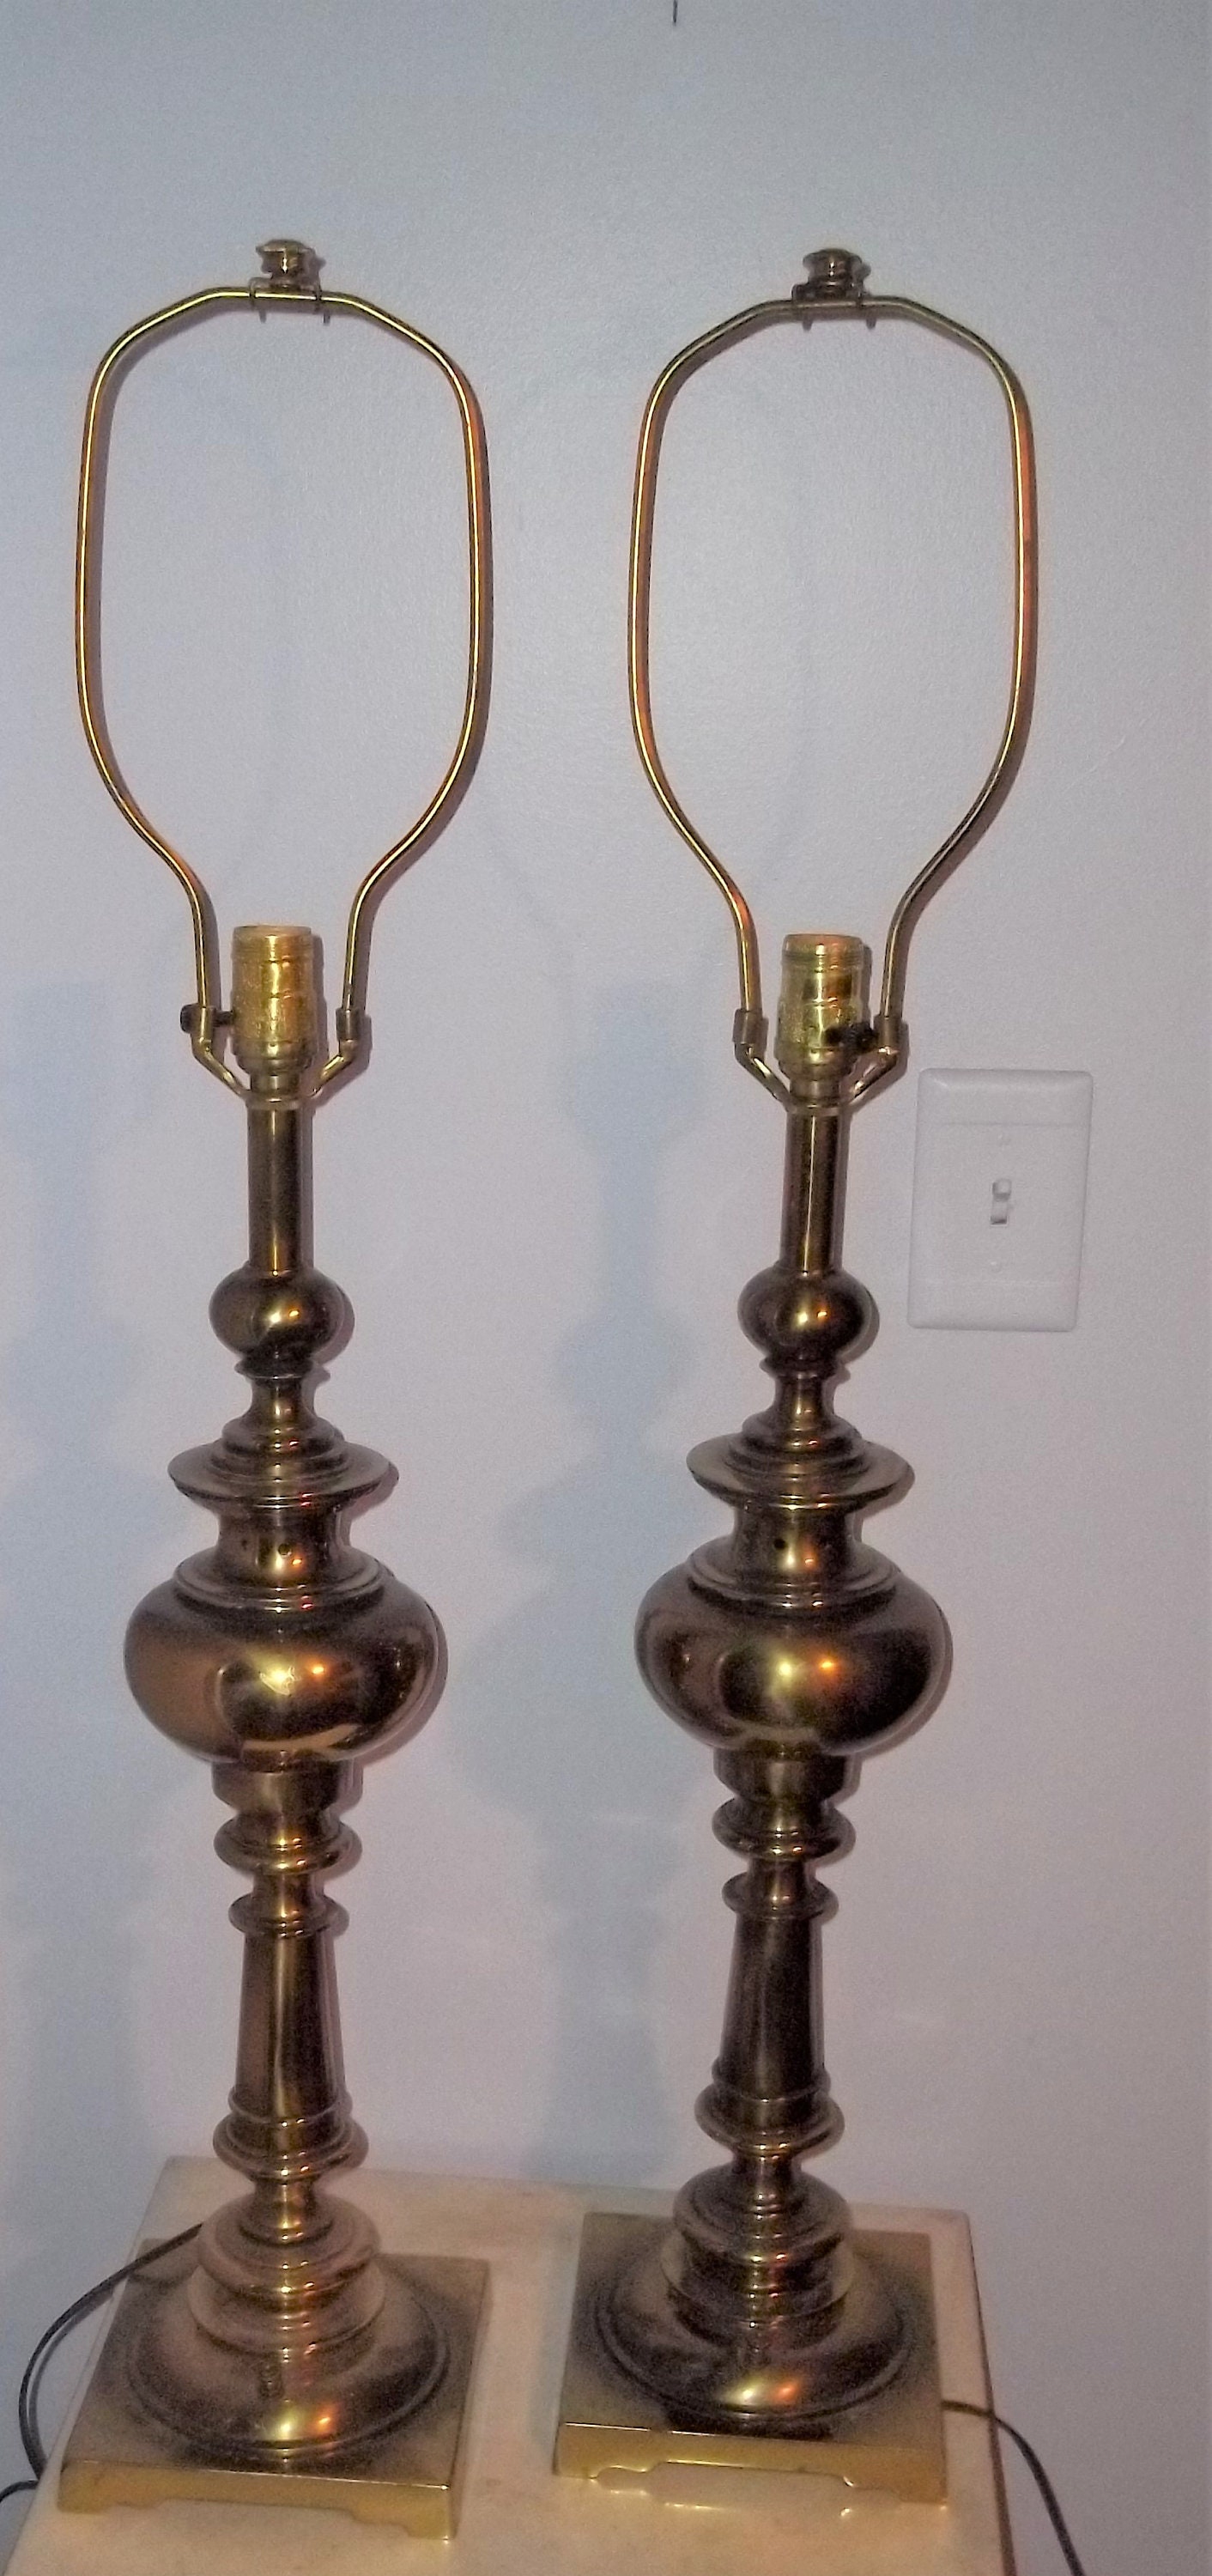 Vintage Brass Table Lamps by Stiffel, 1970s, Pair FREE DOMESTIC SHIPPING -   Canada